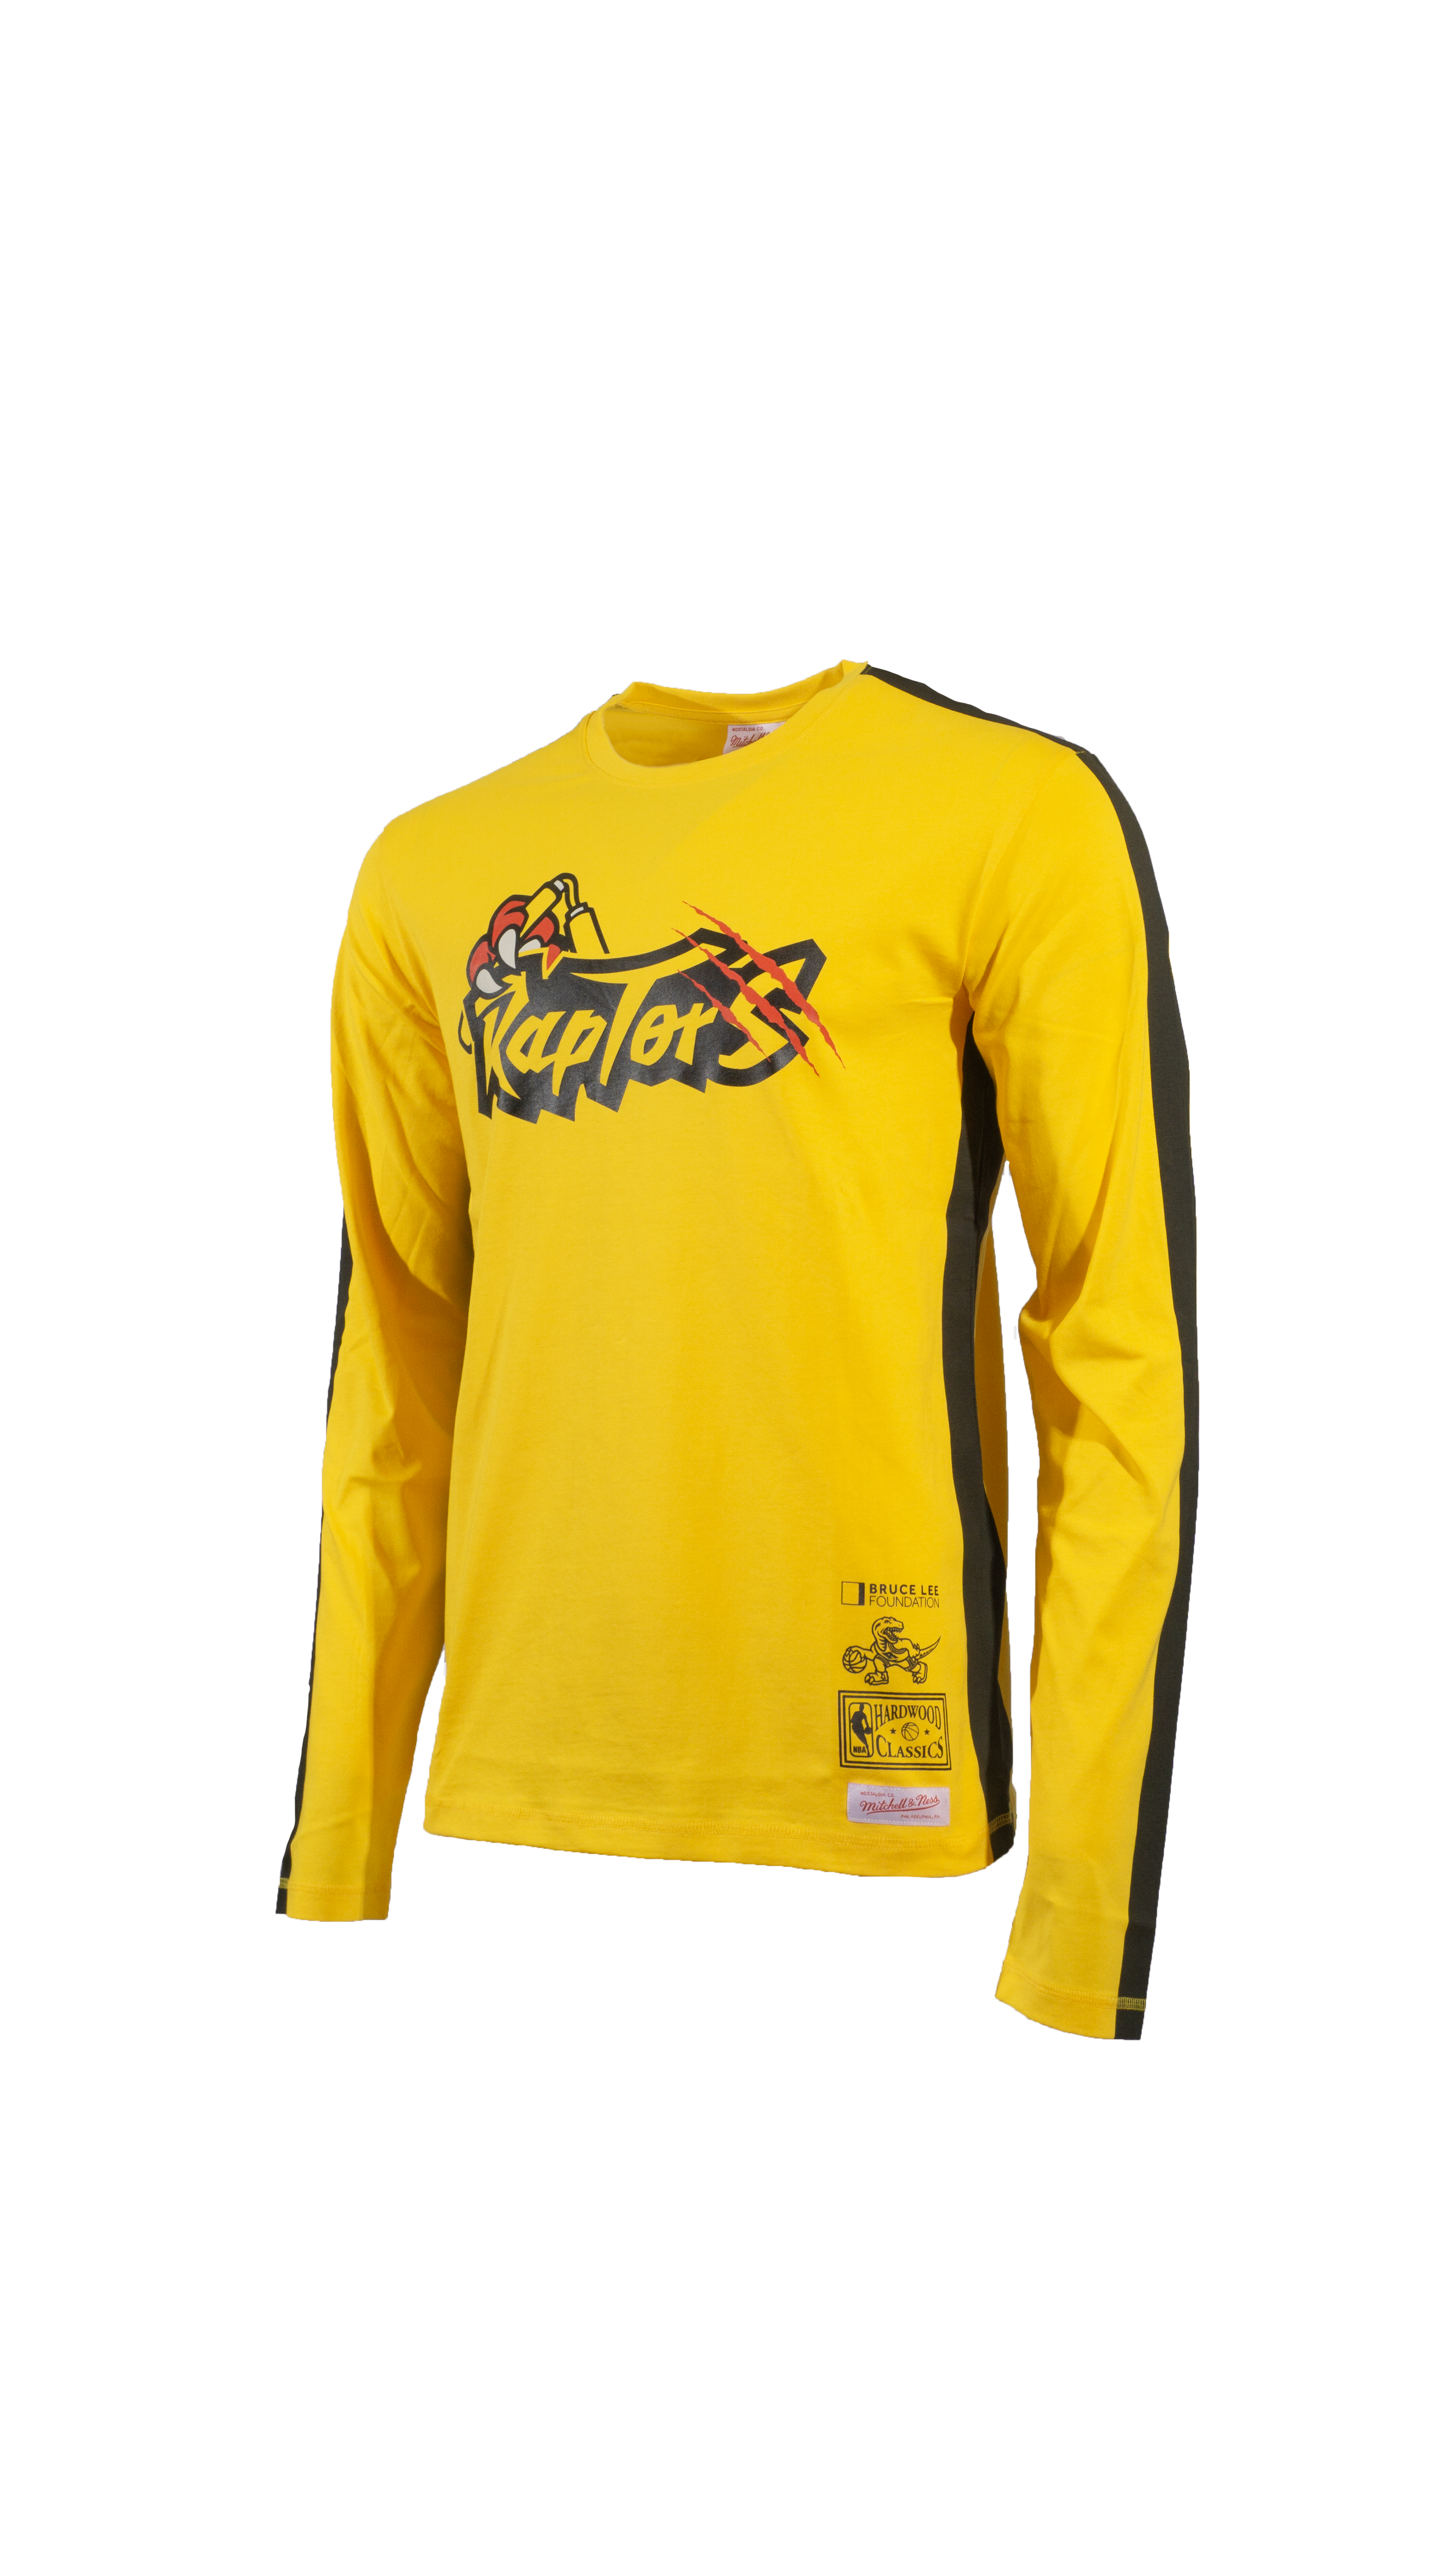 Game of Death Long Sleeve - Front - resized.png